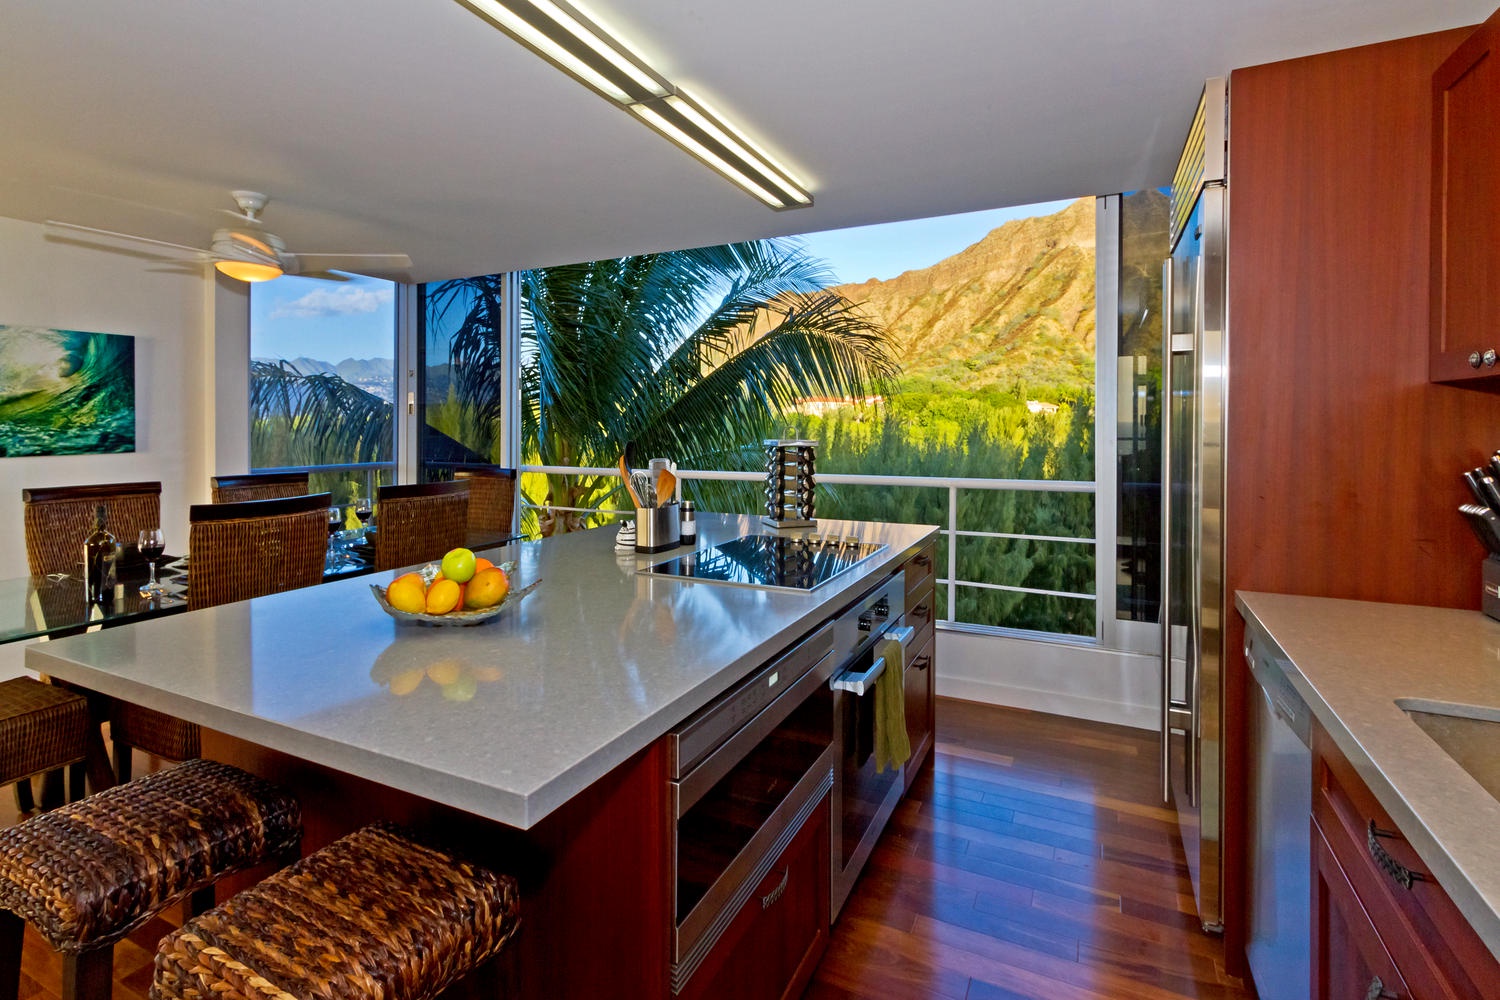 Honolulu Vacation Rentals, Executive Gold Coast Oceanfront Suite - Full gourmet kitchen with stainless steel appliances, including refrigerator, dishwasher, microwave, stove, oven, wine cooler, and trash compactor.